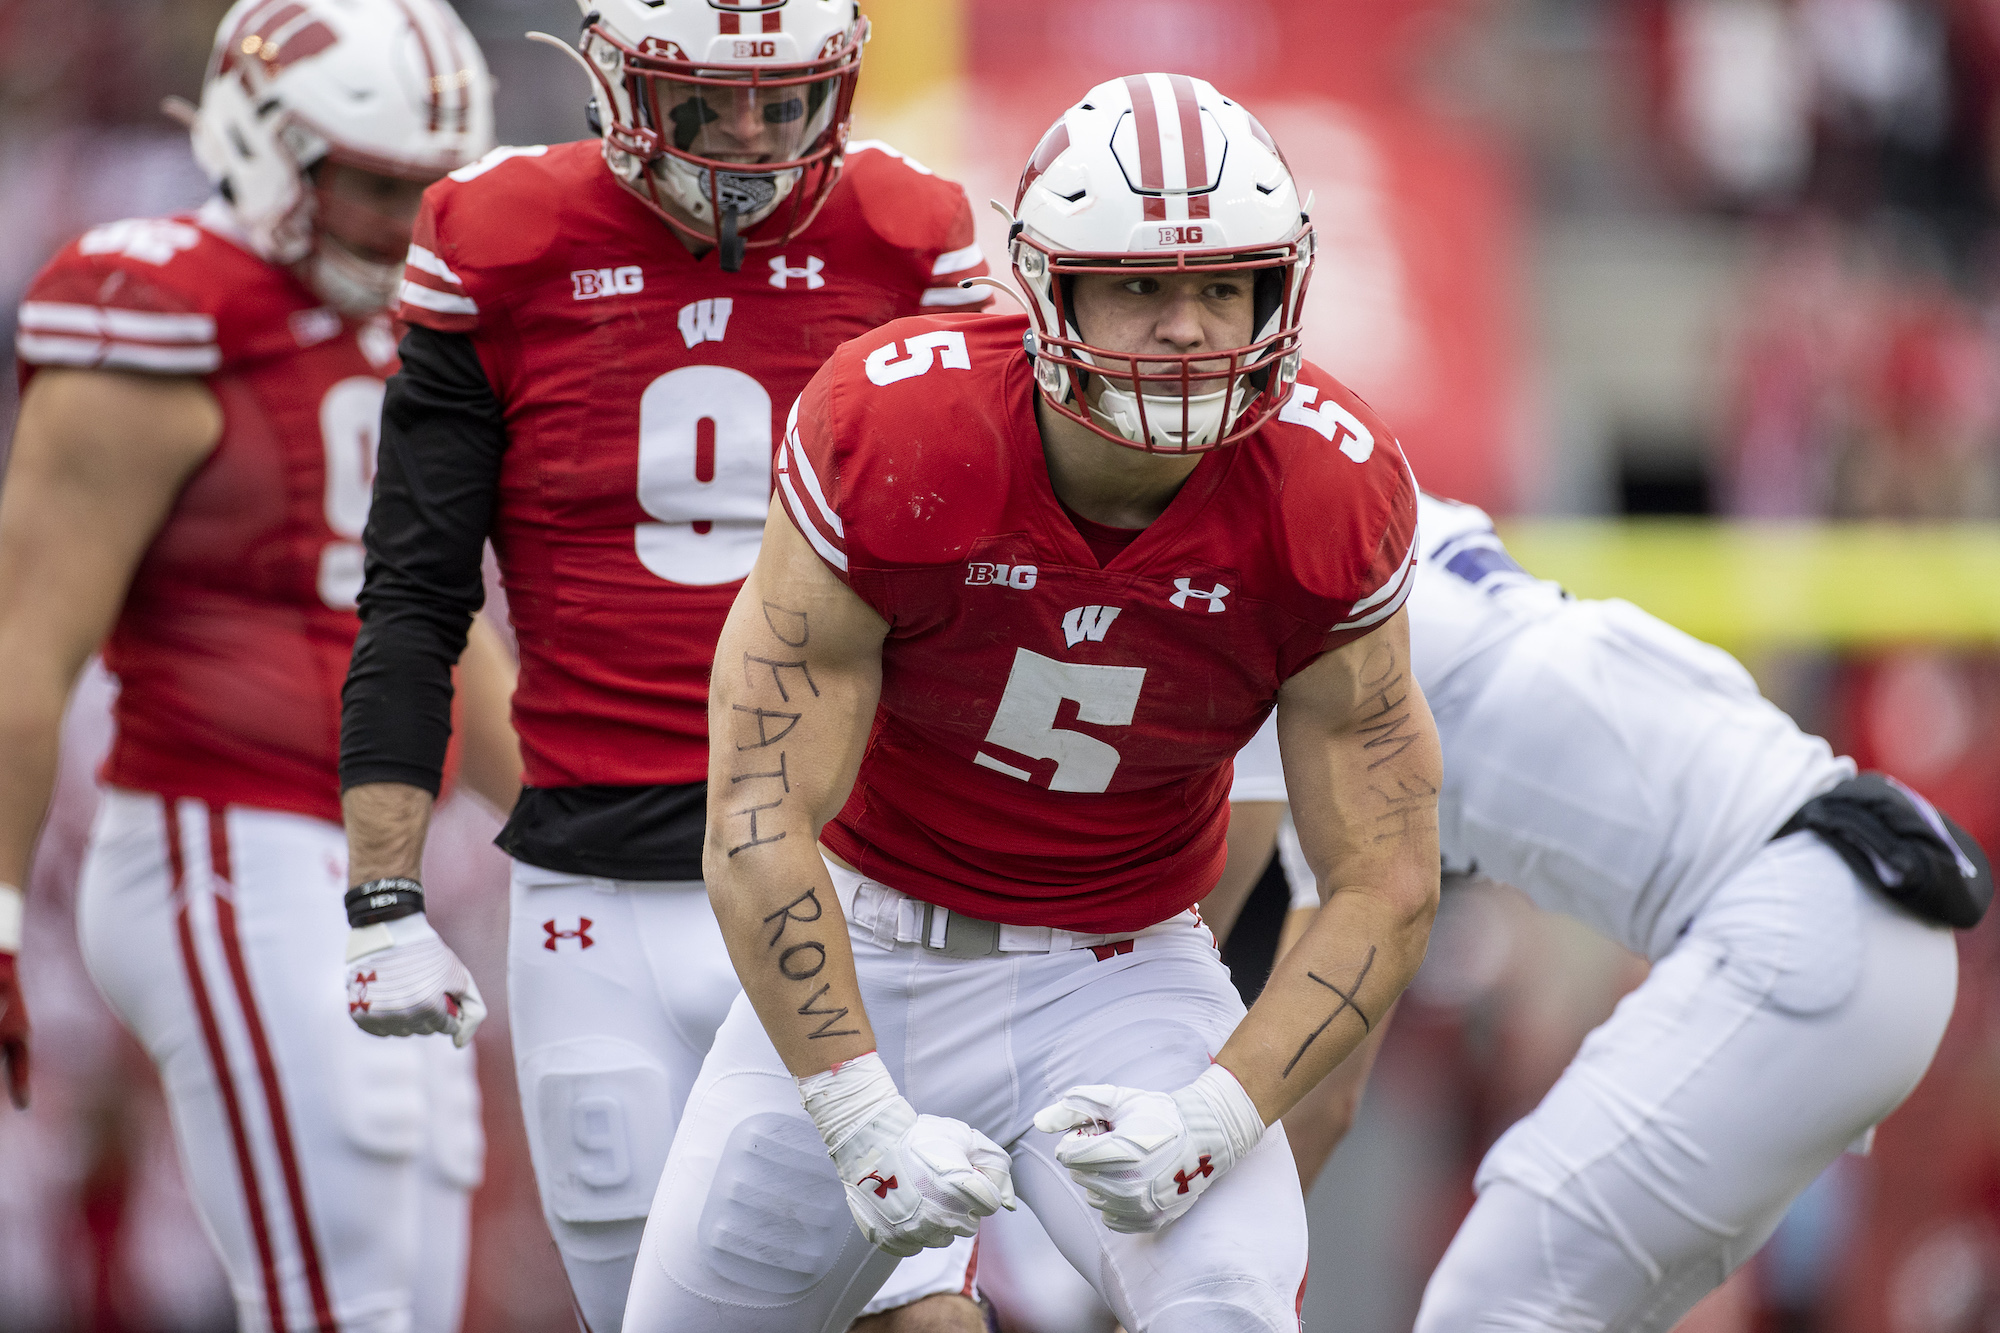 All-American LB Leo Chenal Heads to Chiefs in NFL Draft Third Round